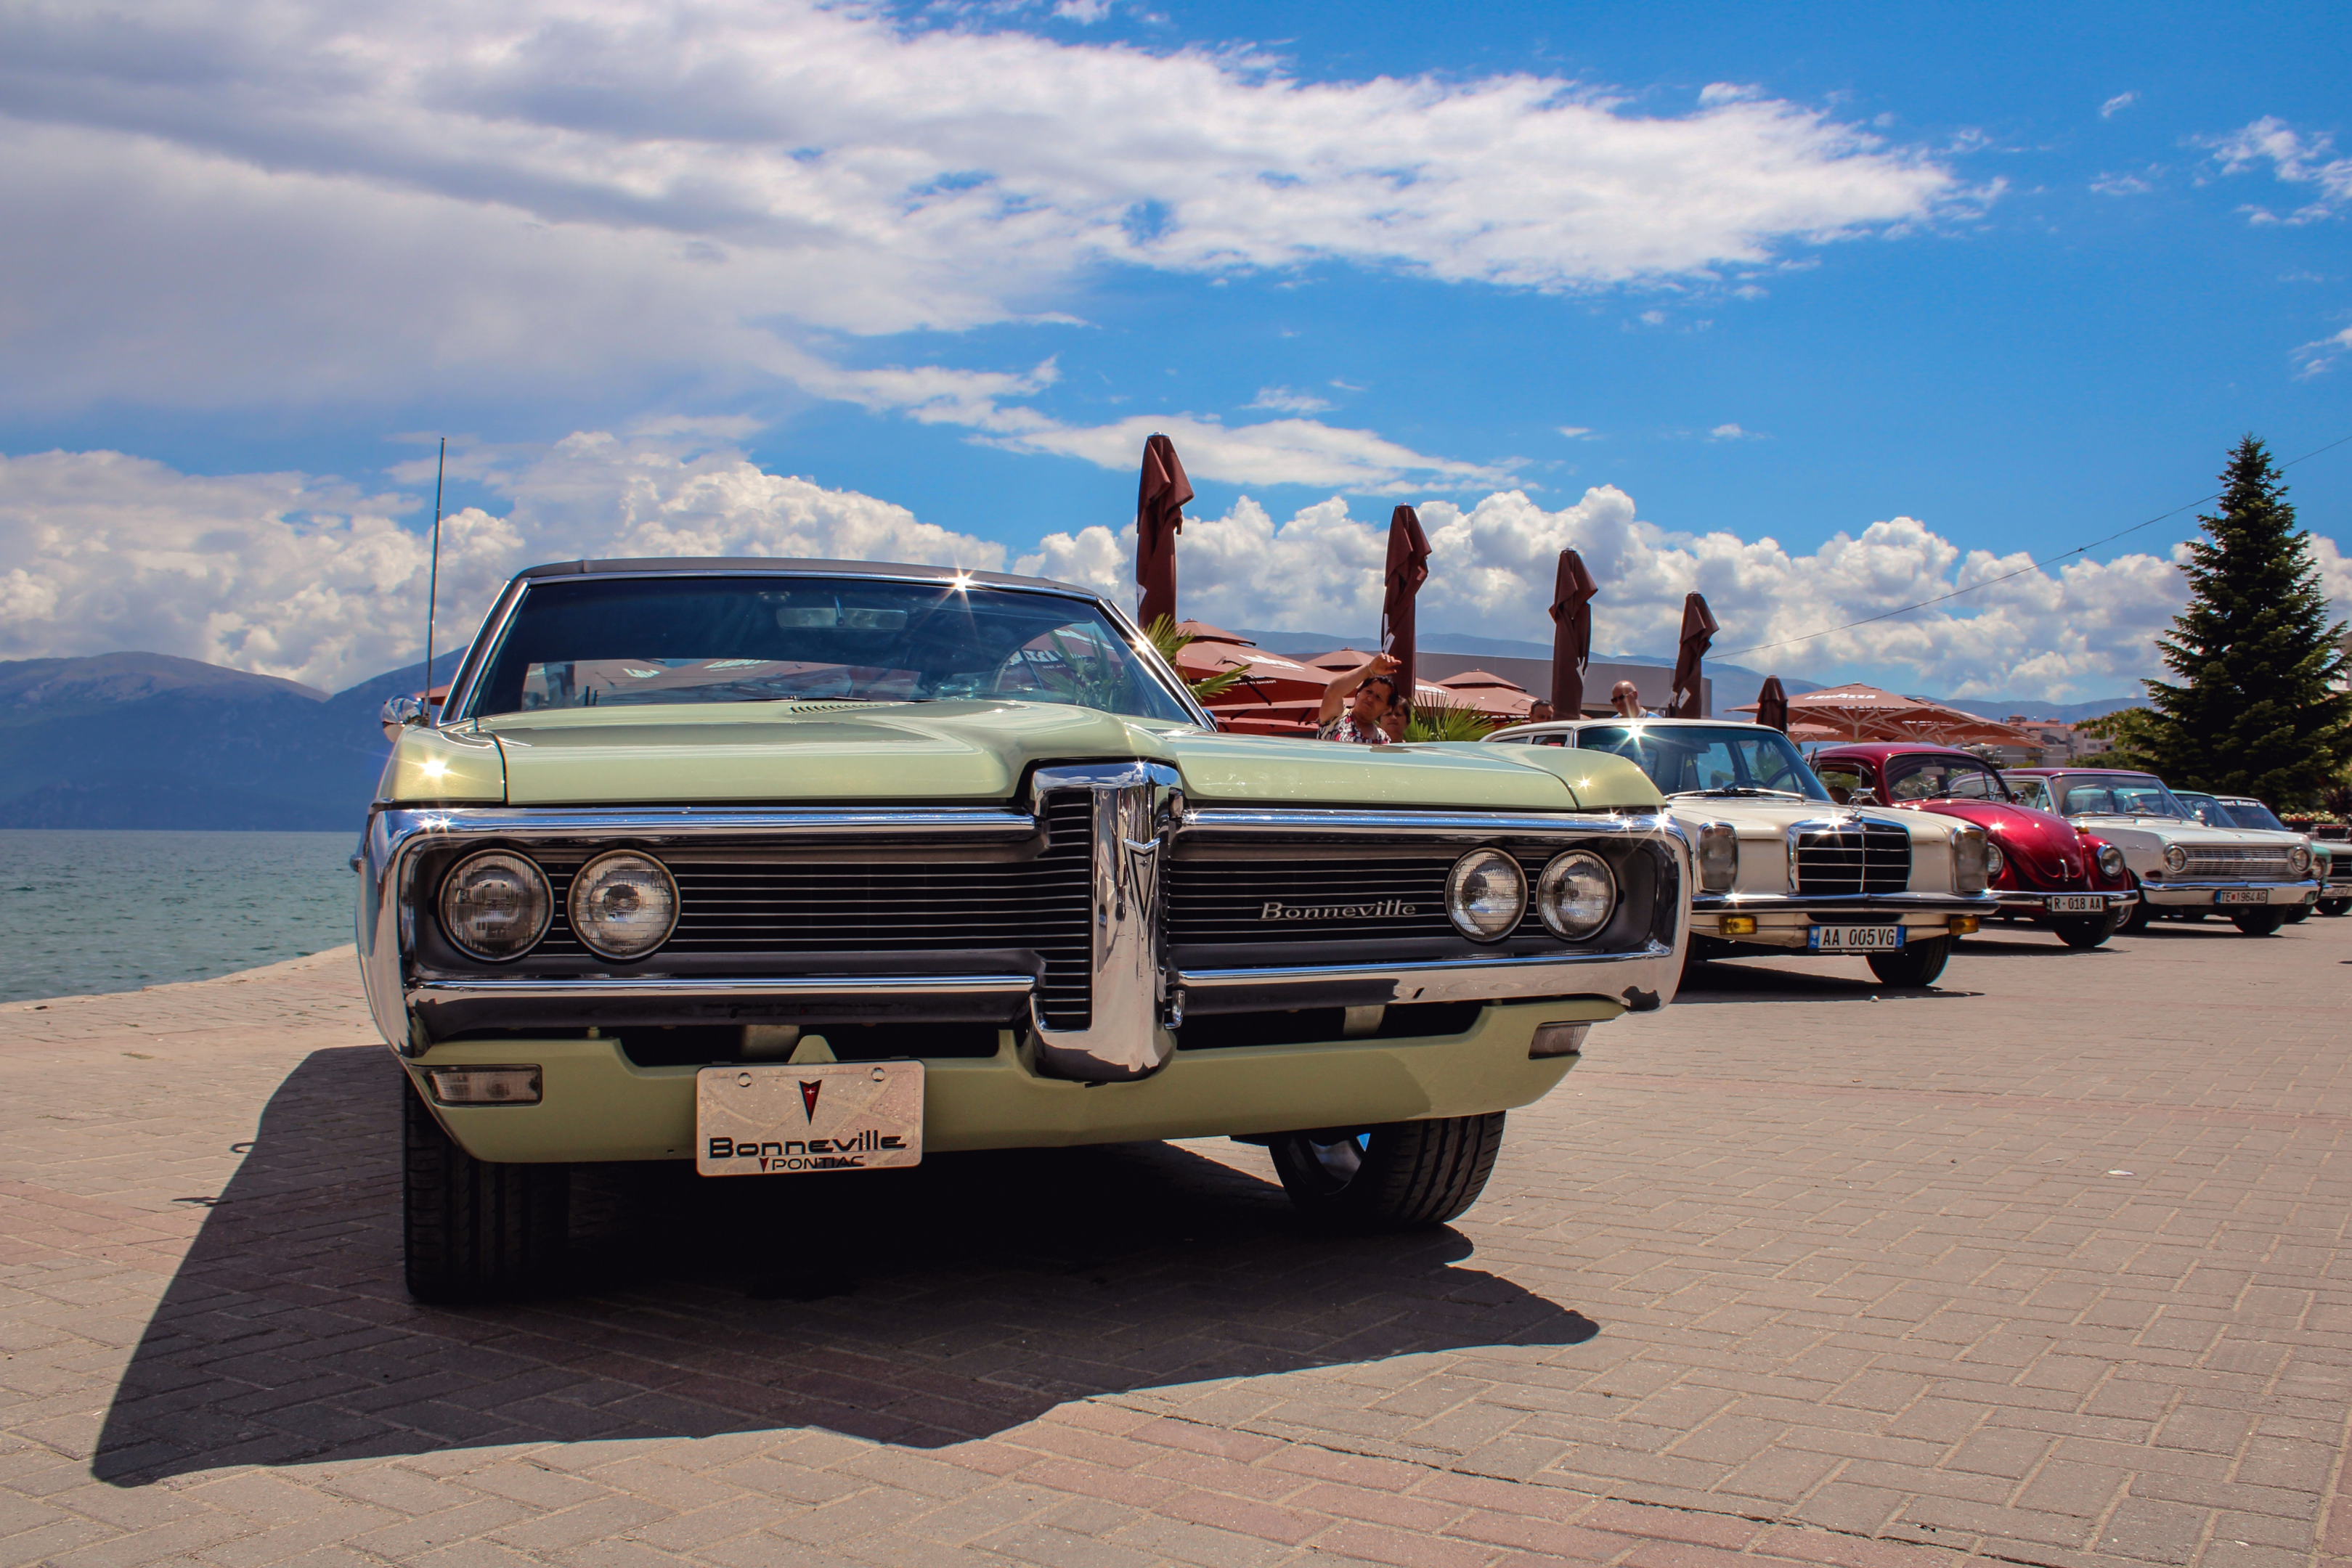 A row of random classic cars parked for a car show. We offer enclosed auto transport services.